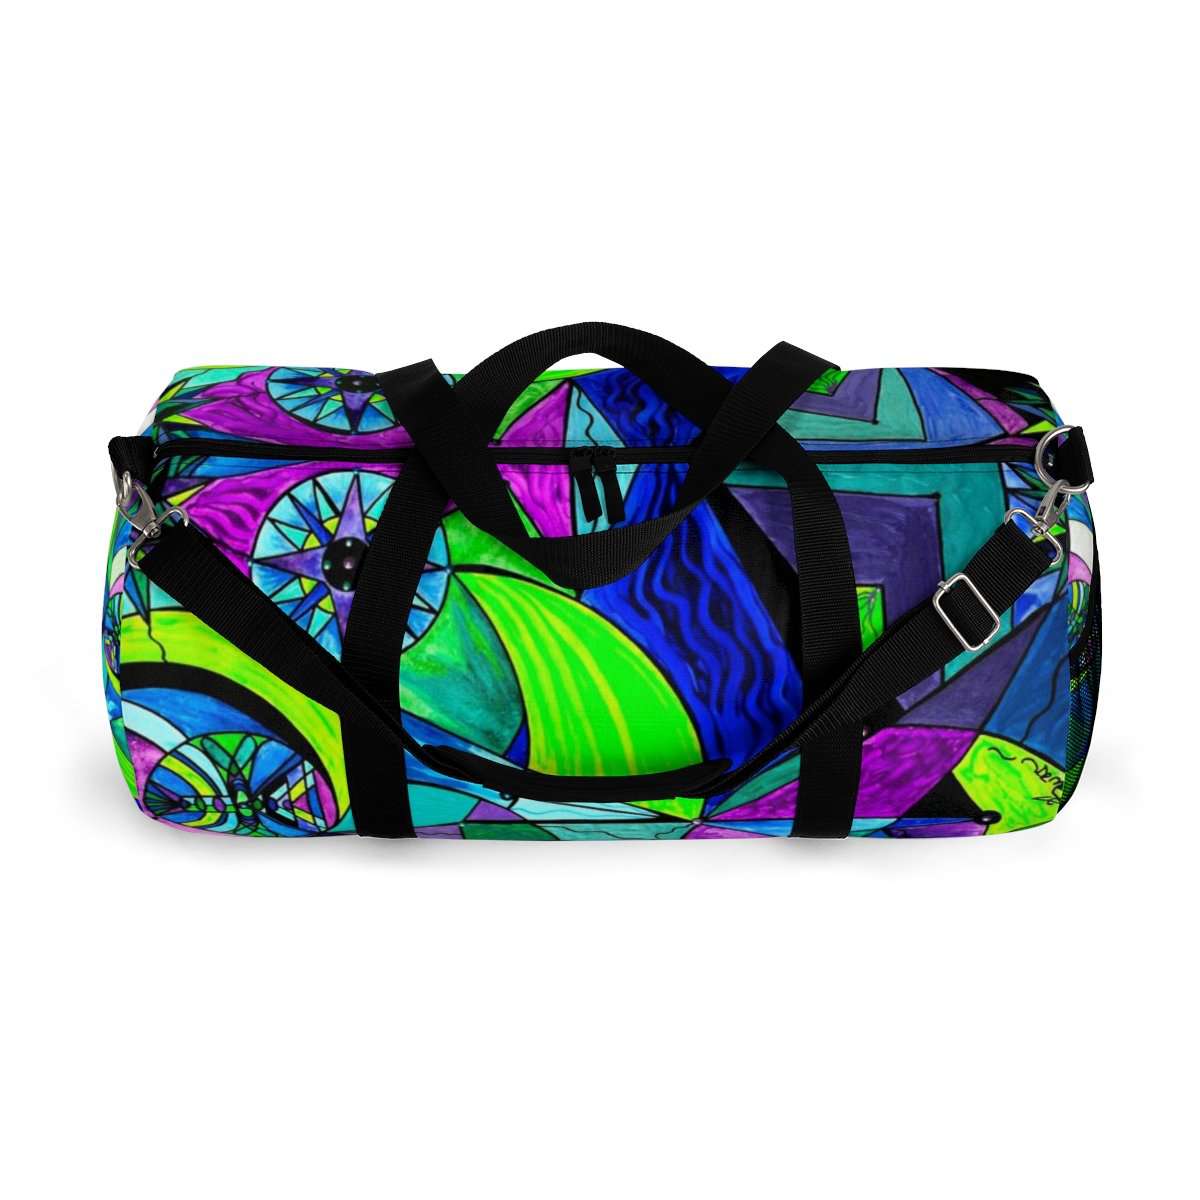 shop-online-and-get-your-favourite-arcturian-astral-travel-grid-duffle-bag-online_10.jpg